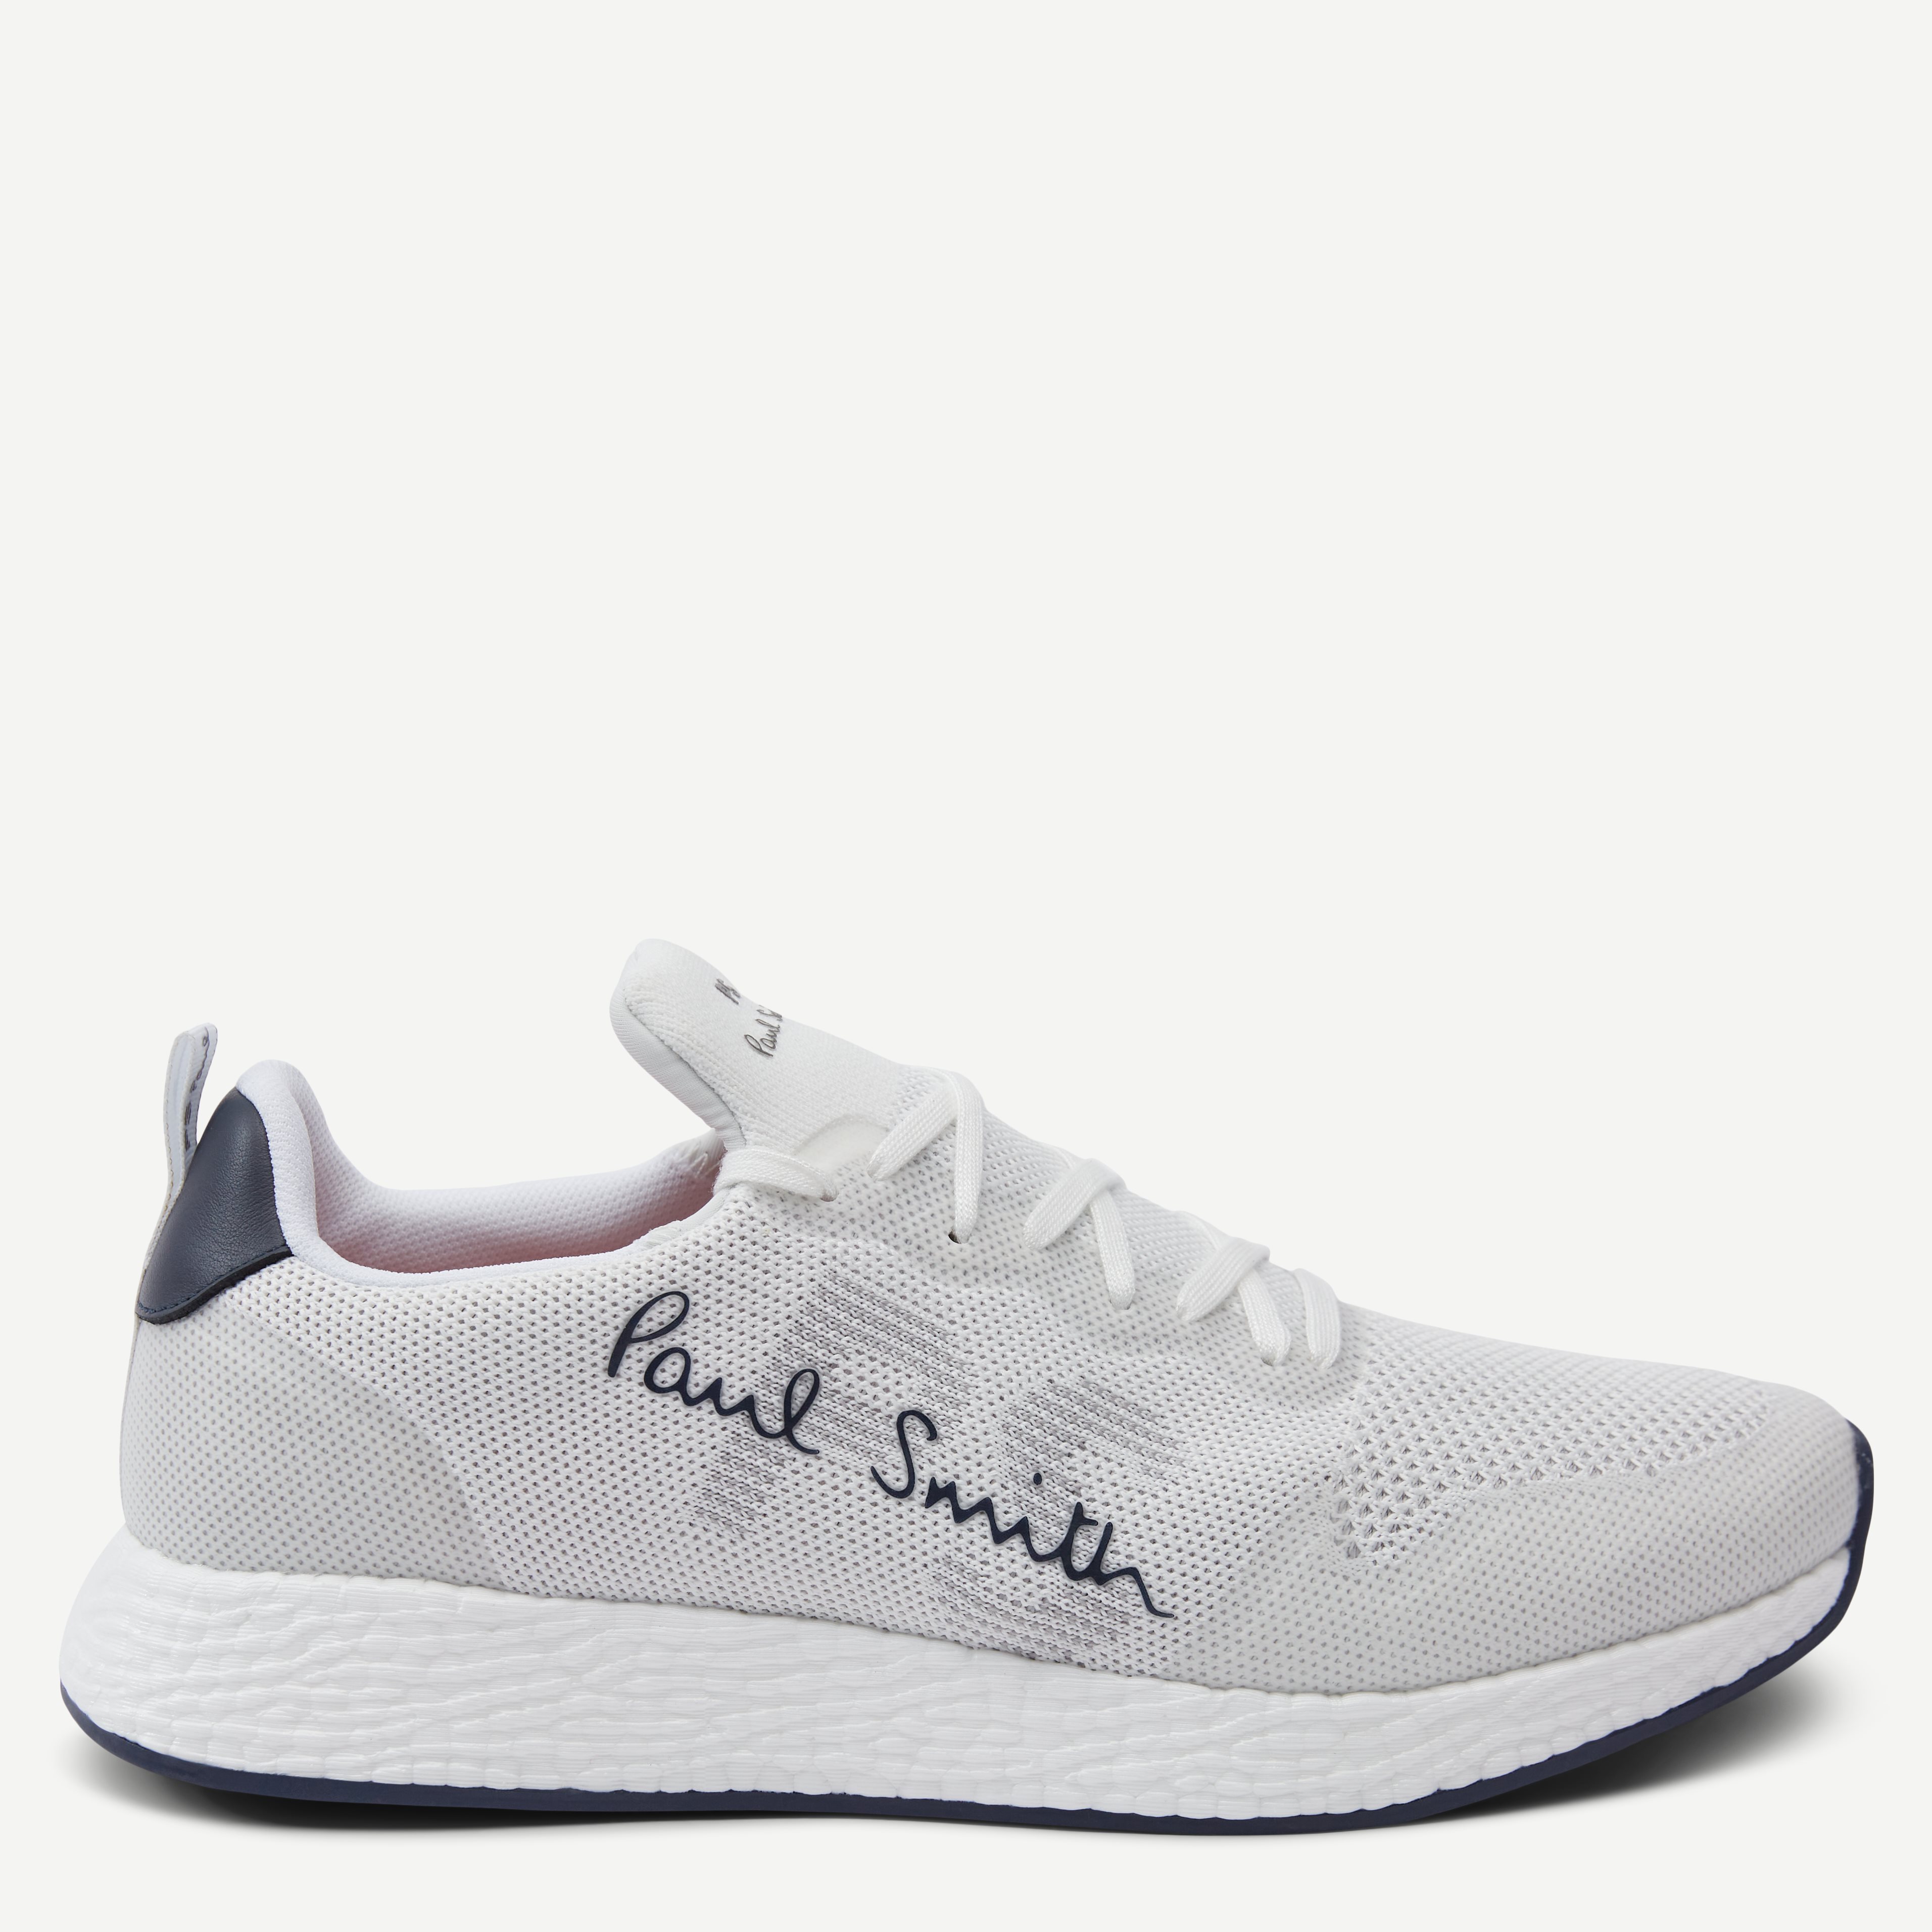 Paul Smith Shoes Shoes KRS02 HPLY White